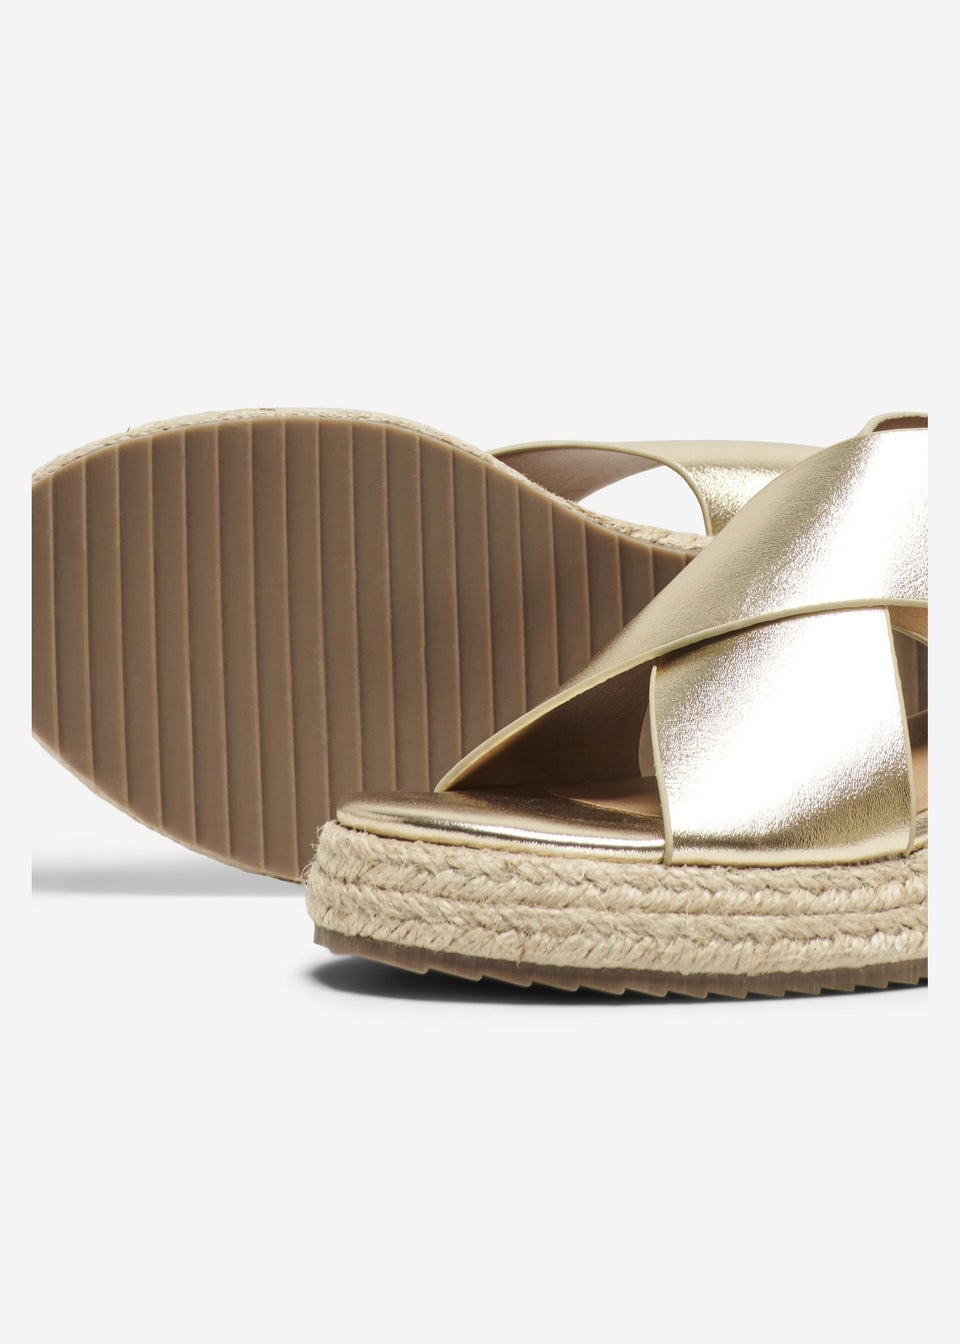 ONLY Gold Cross Strap PU Sandals